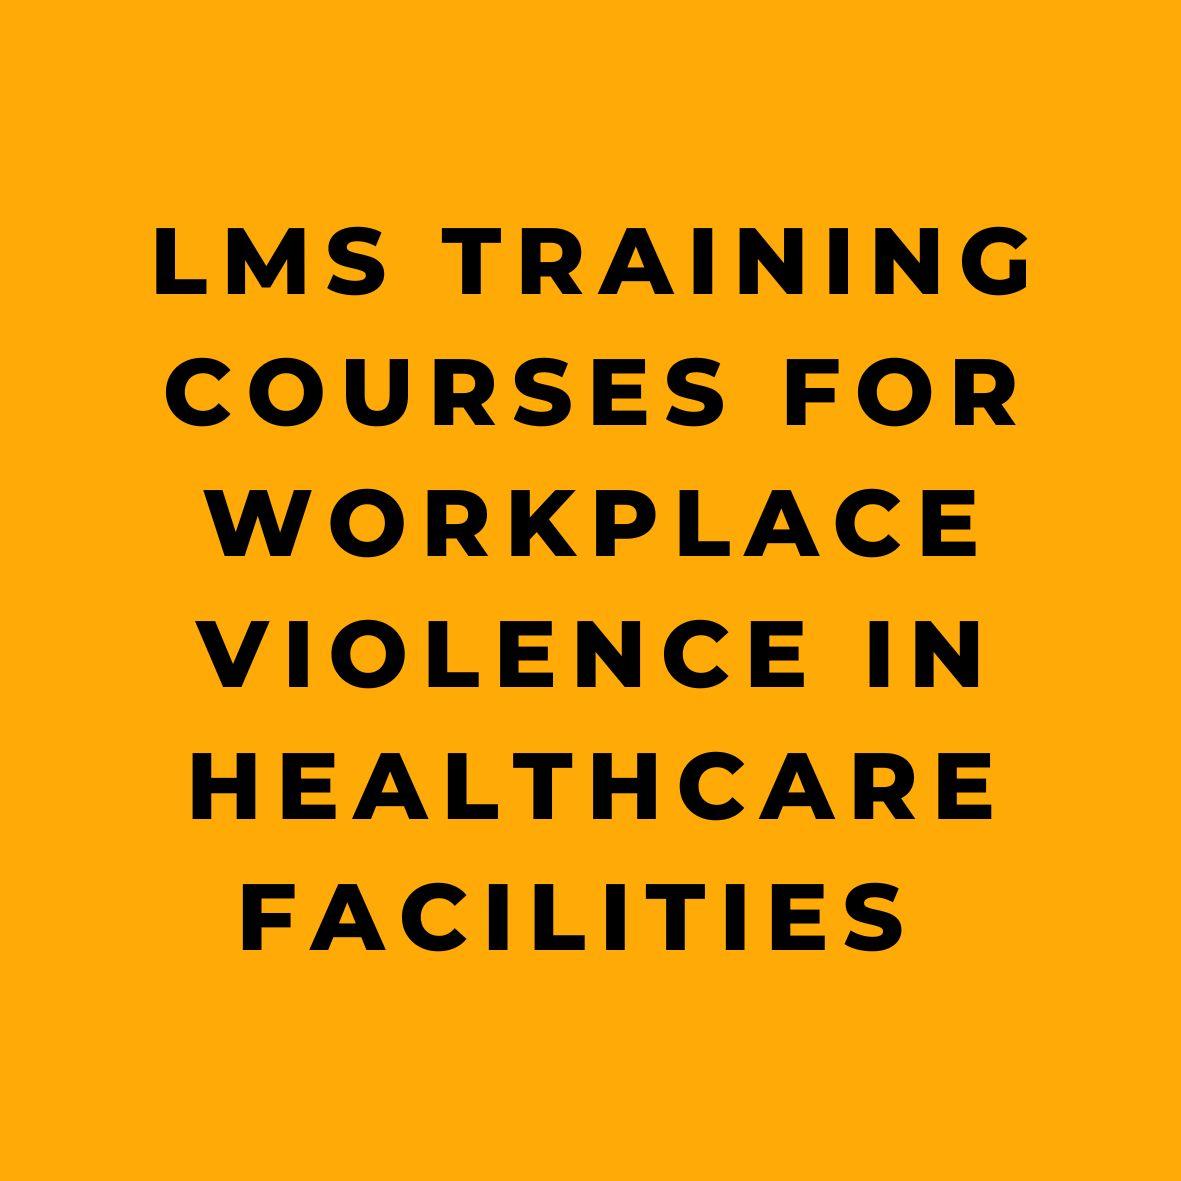 LMS Training Courses for Workplace Violence in Healthcare Facilities